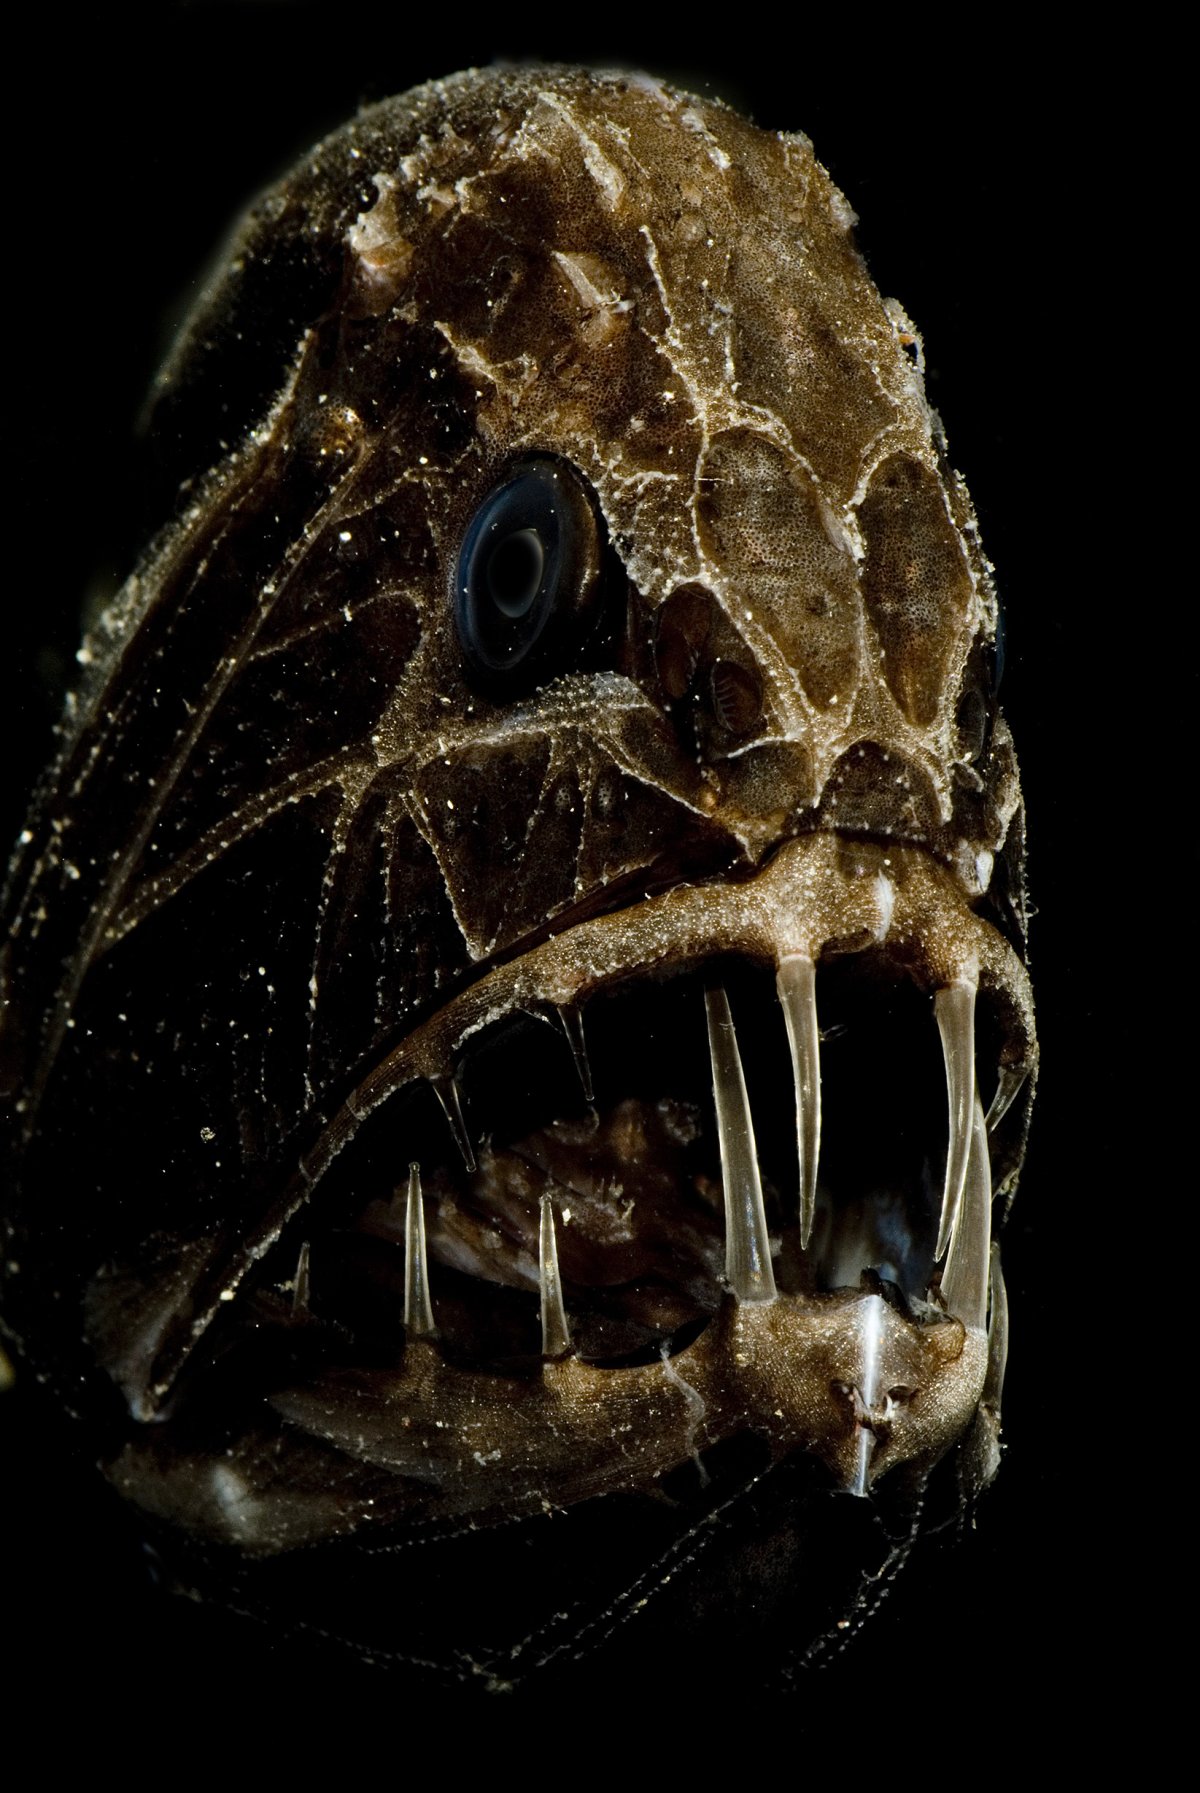 A close-up image of a fangtooth fish